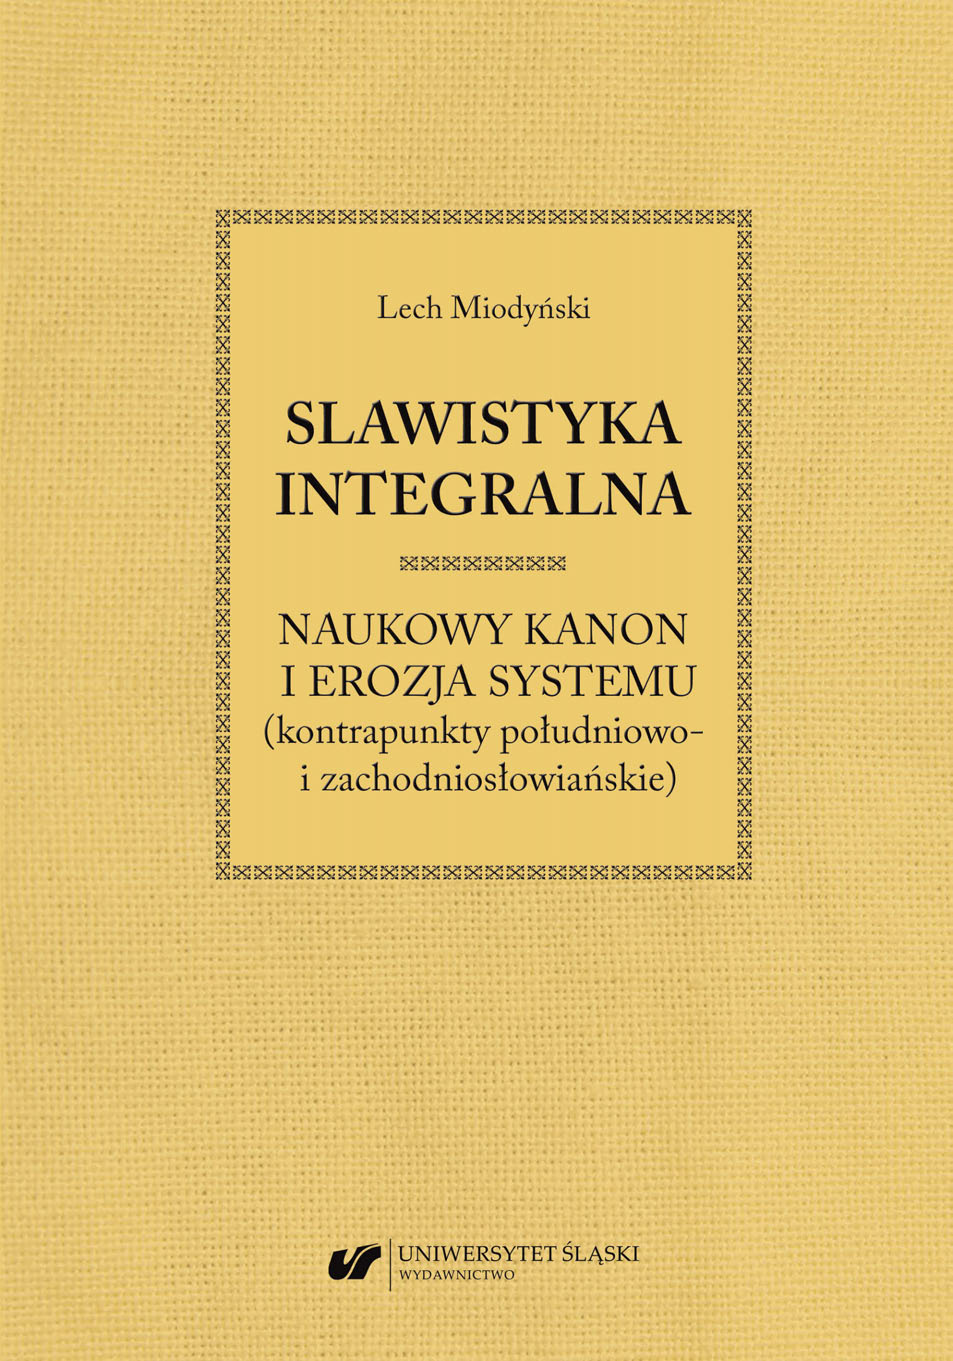 Integral Slavic studies – the scientific canon and the erosion of the system (South and West Slavic counterpoints)